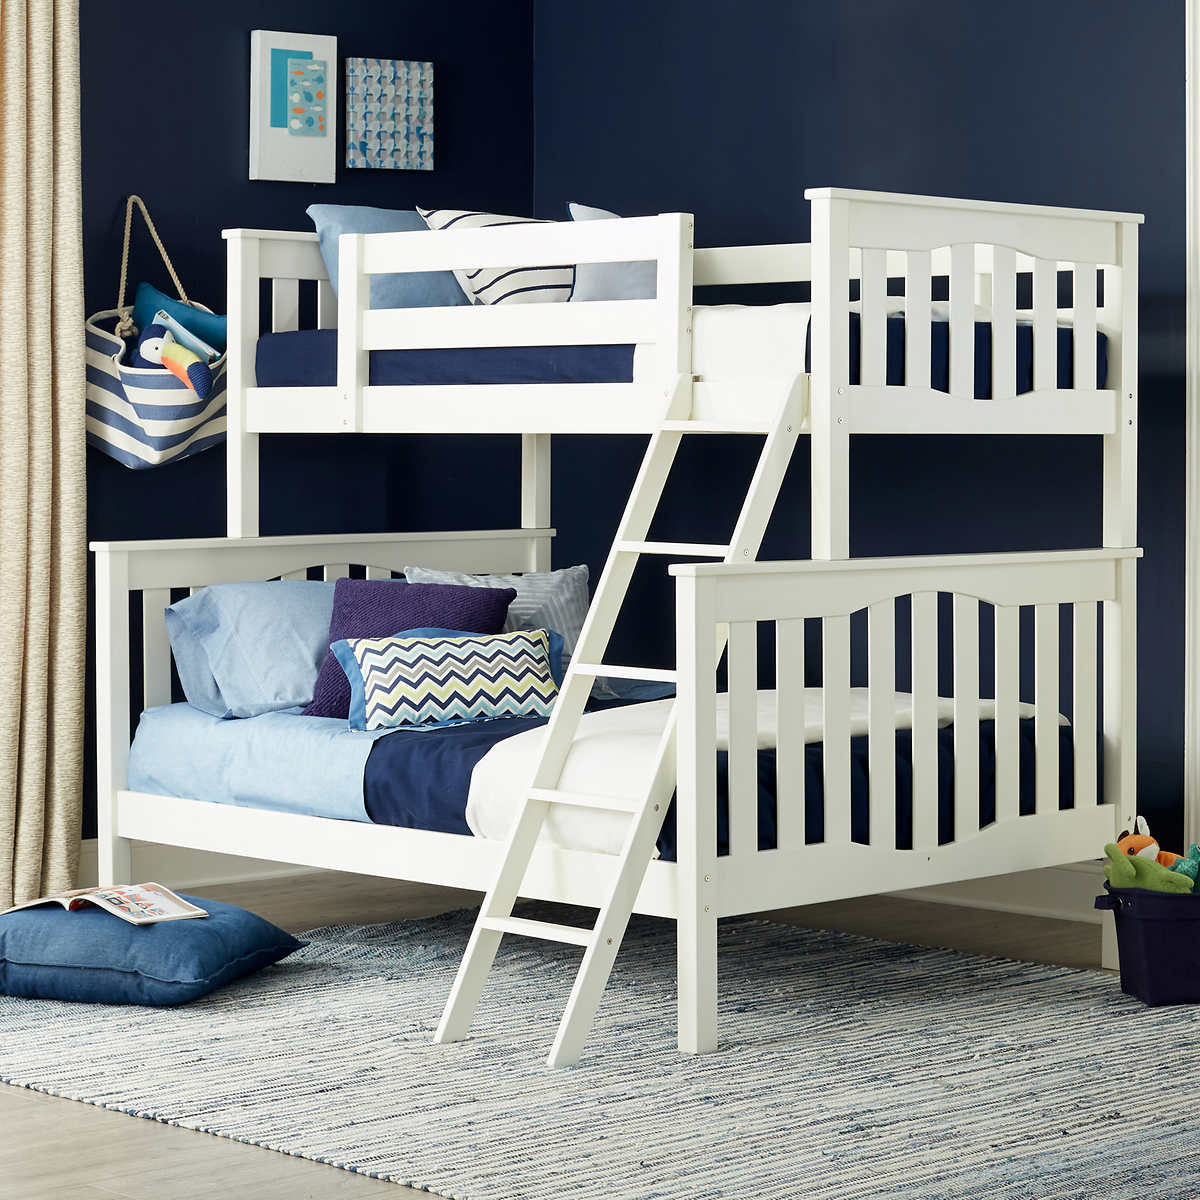 Seneca Twin Over Full Bunkbed Costco, Whalen Bunk Bed Assembly Instructions